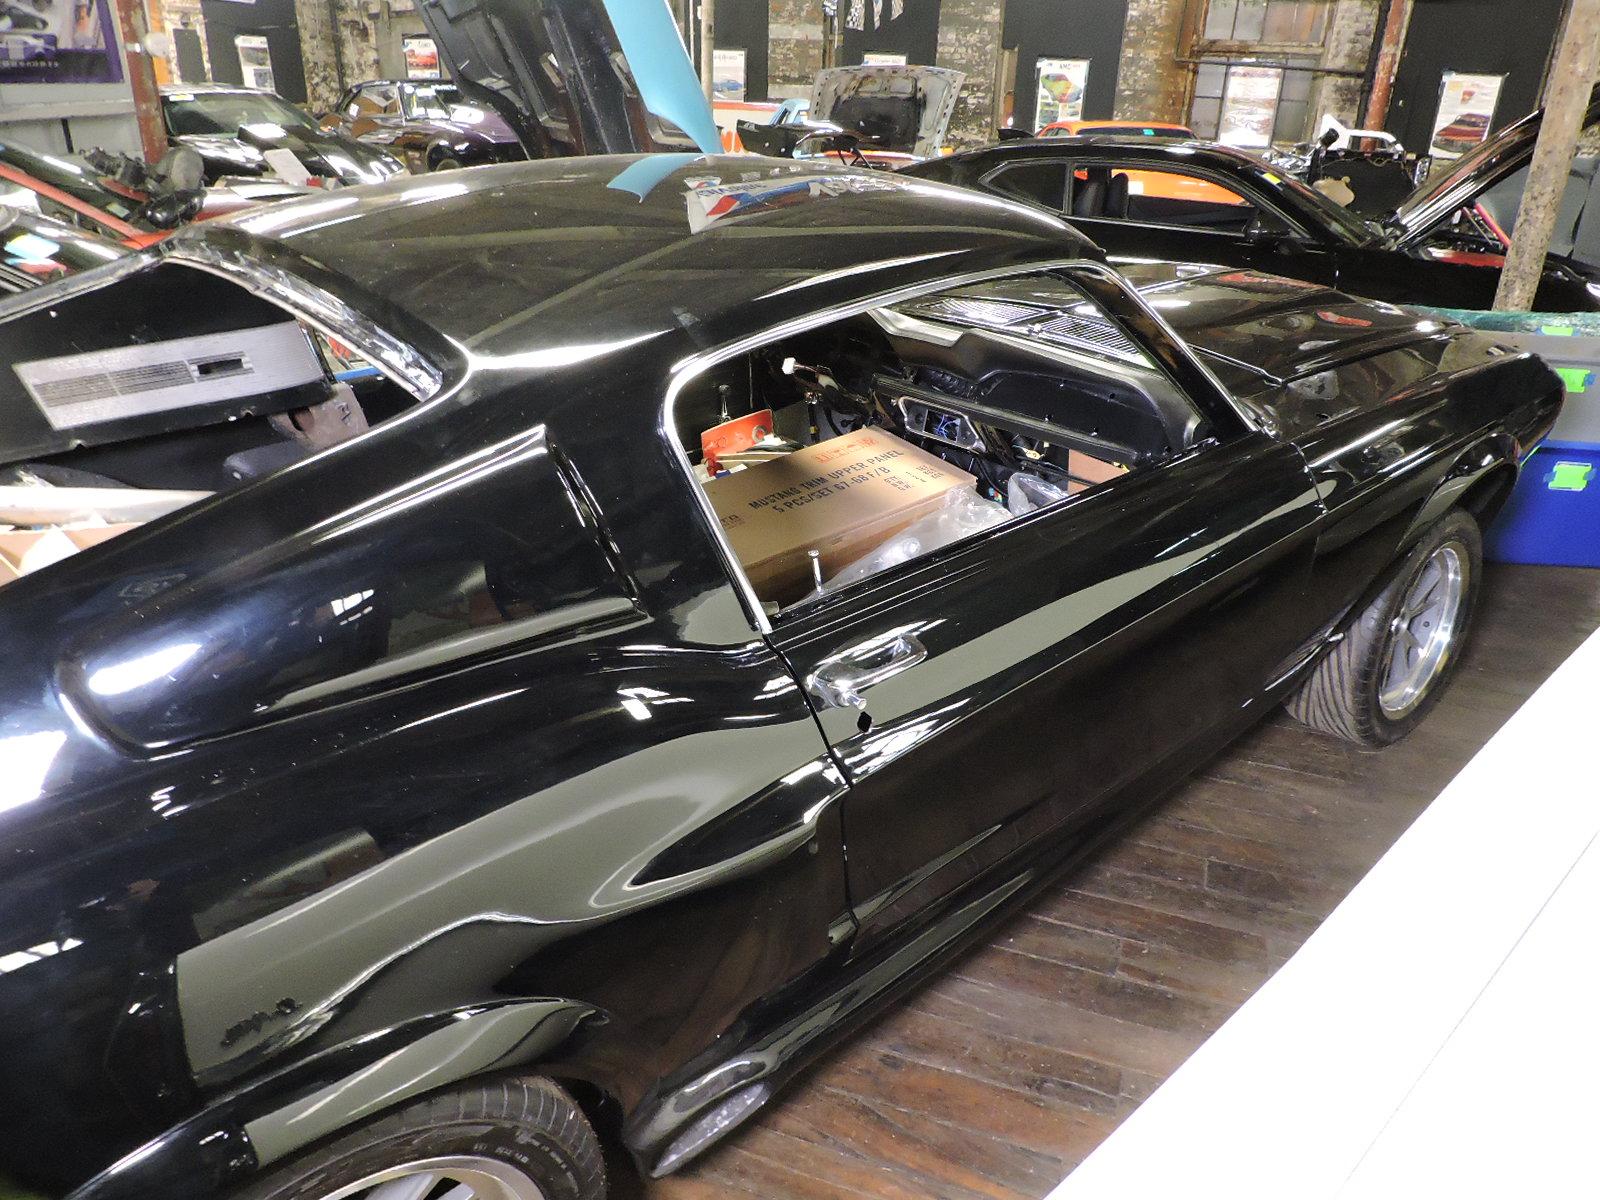 Modified "Eleanor" Tribute - 1968 Ford Mustang Fastback - 85% Complete Project